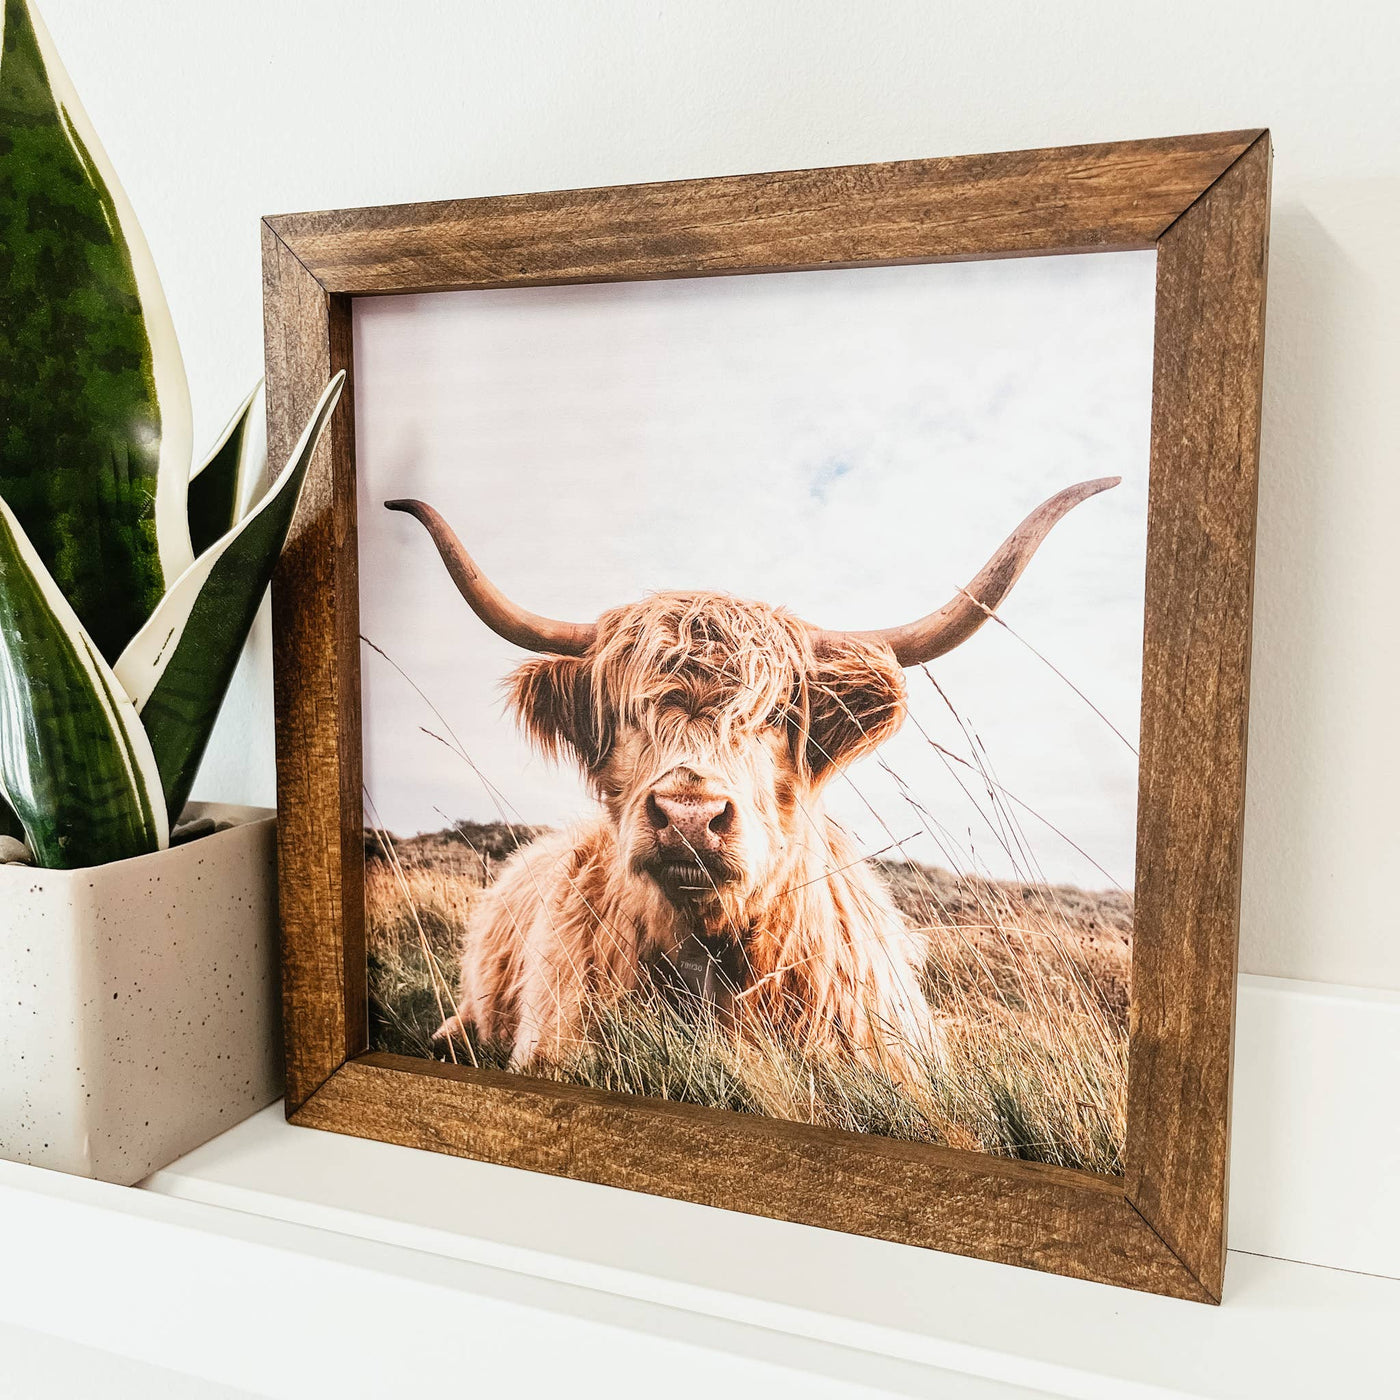 Highland Cow Framed Wooden Sign - The Local Space